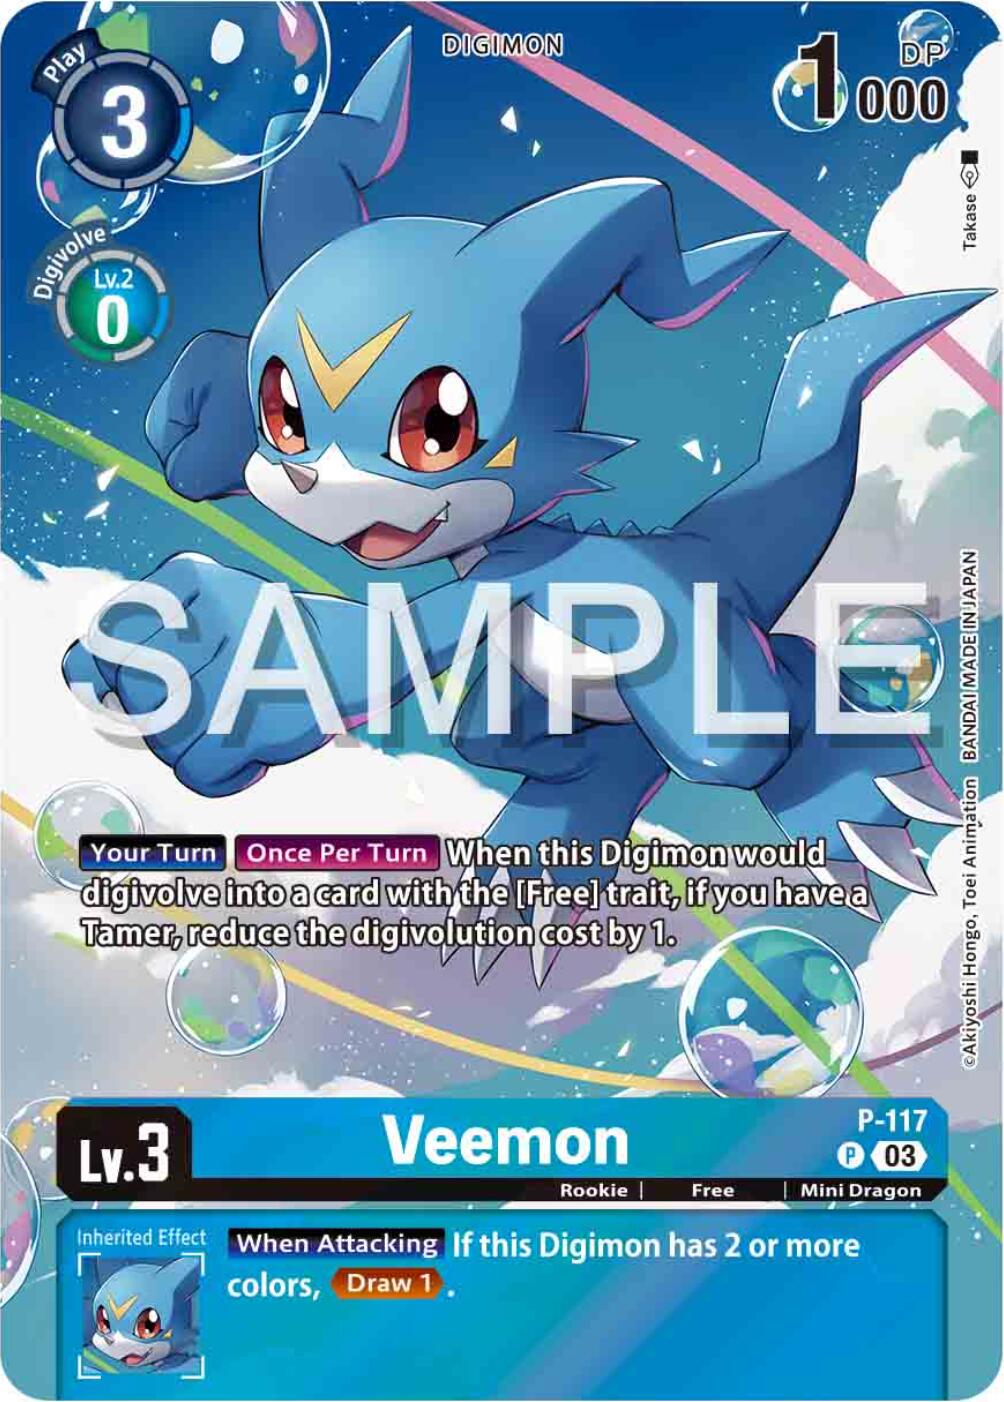 Veemon [P-117] (Digimon Adventure 02: The Beginning Set) [Promotional Cards] | Anubis Games and Hobby